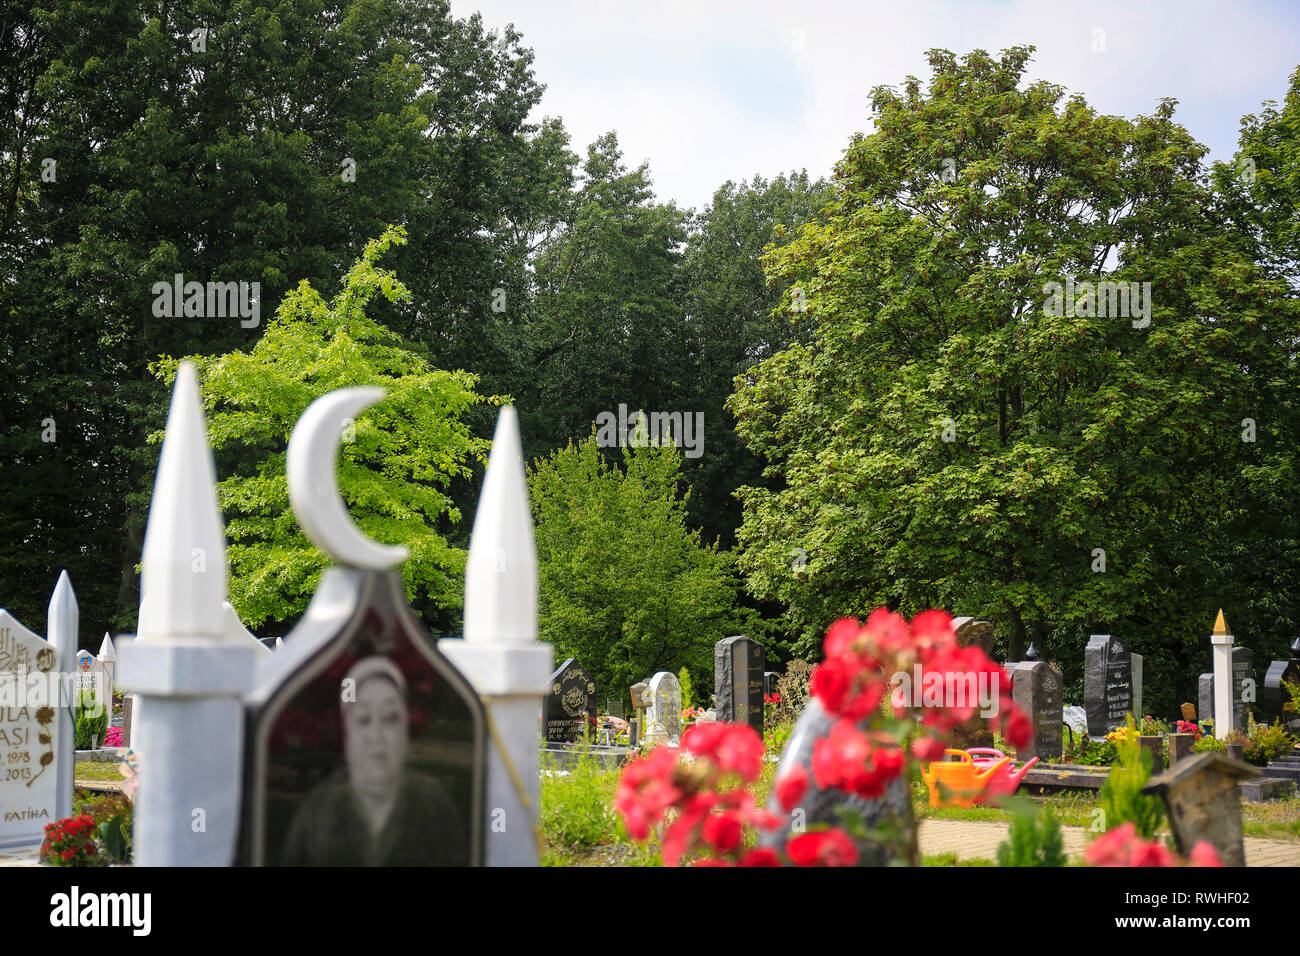 Essen, North Rhine-Westphalia, Ruhr area, Germany - The Hallopark in the north of Essen is one of the oldest green areas in Essen, here the Muslim par Stock Photo